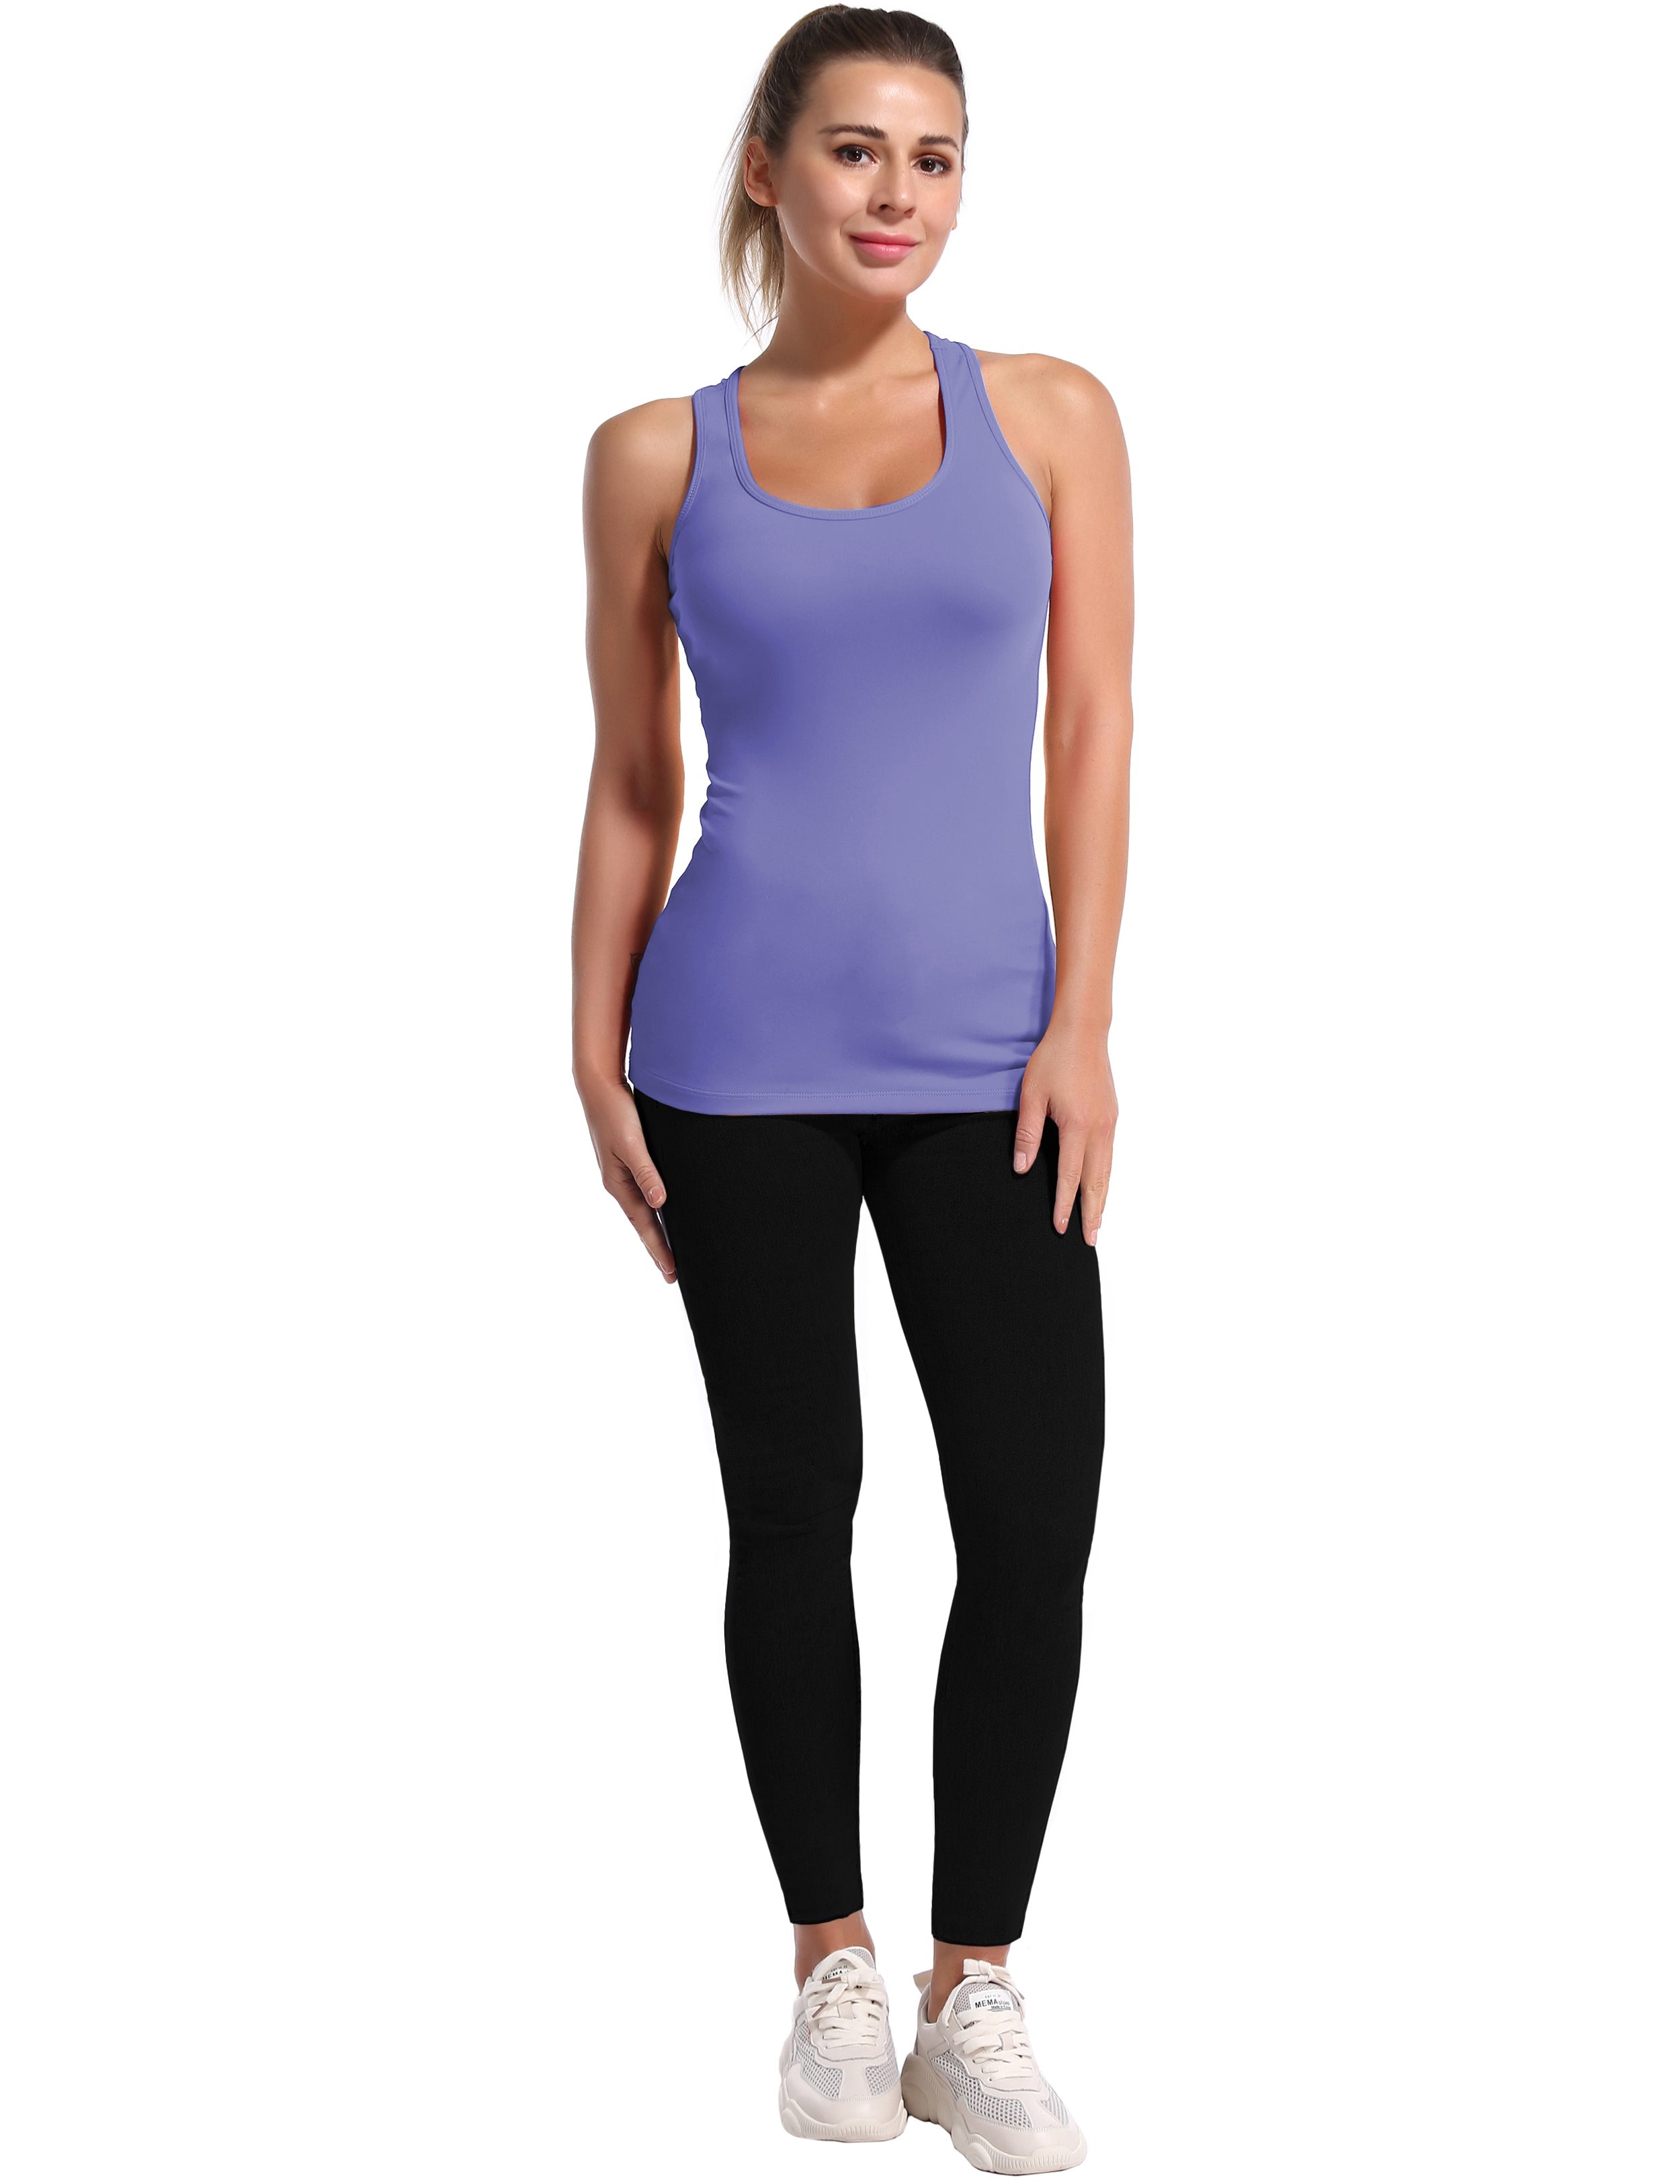 Racerback Athletic Tank Tops lavender 92%Nylon/8%Spandex(Cotton Soft) Designed for Pilates Tight Fit So buttery soft, it feels weightless Sweat-wicking Four-way stretch Breathable Contours your body Sits below the waistband for moderate, everyday coverage